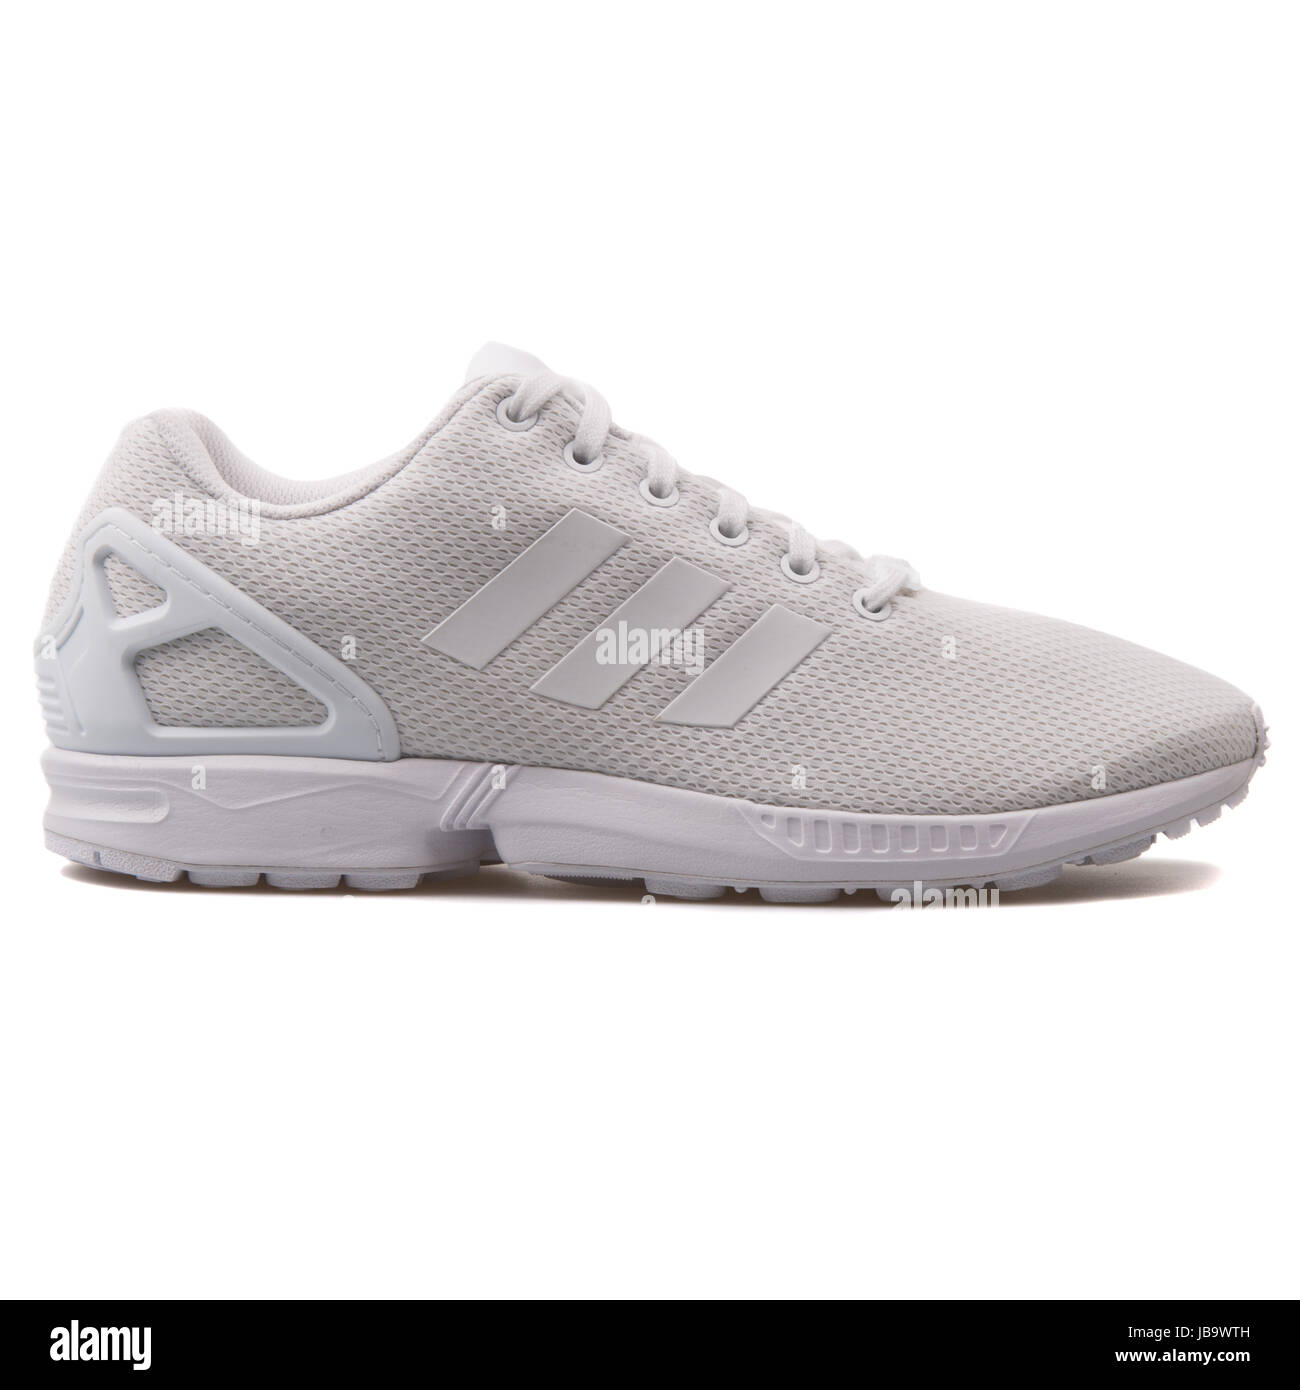 Adidas ZX Flux White Men's Running Shoes - AF6403 Stock Photo - Alamy